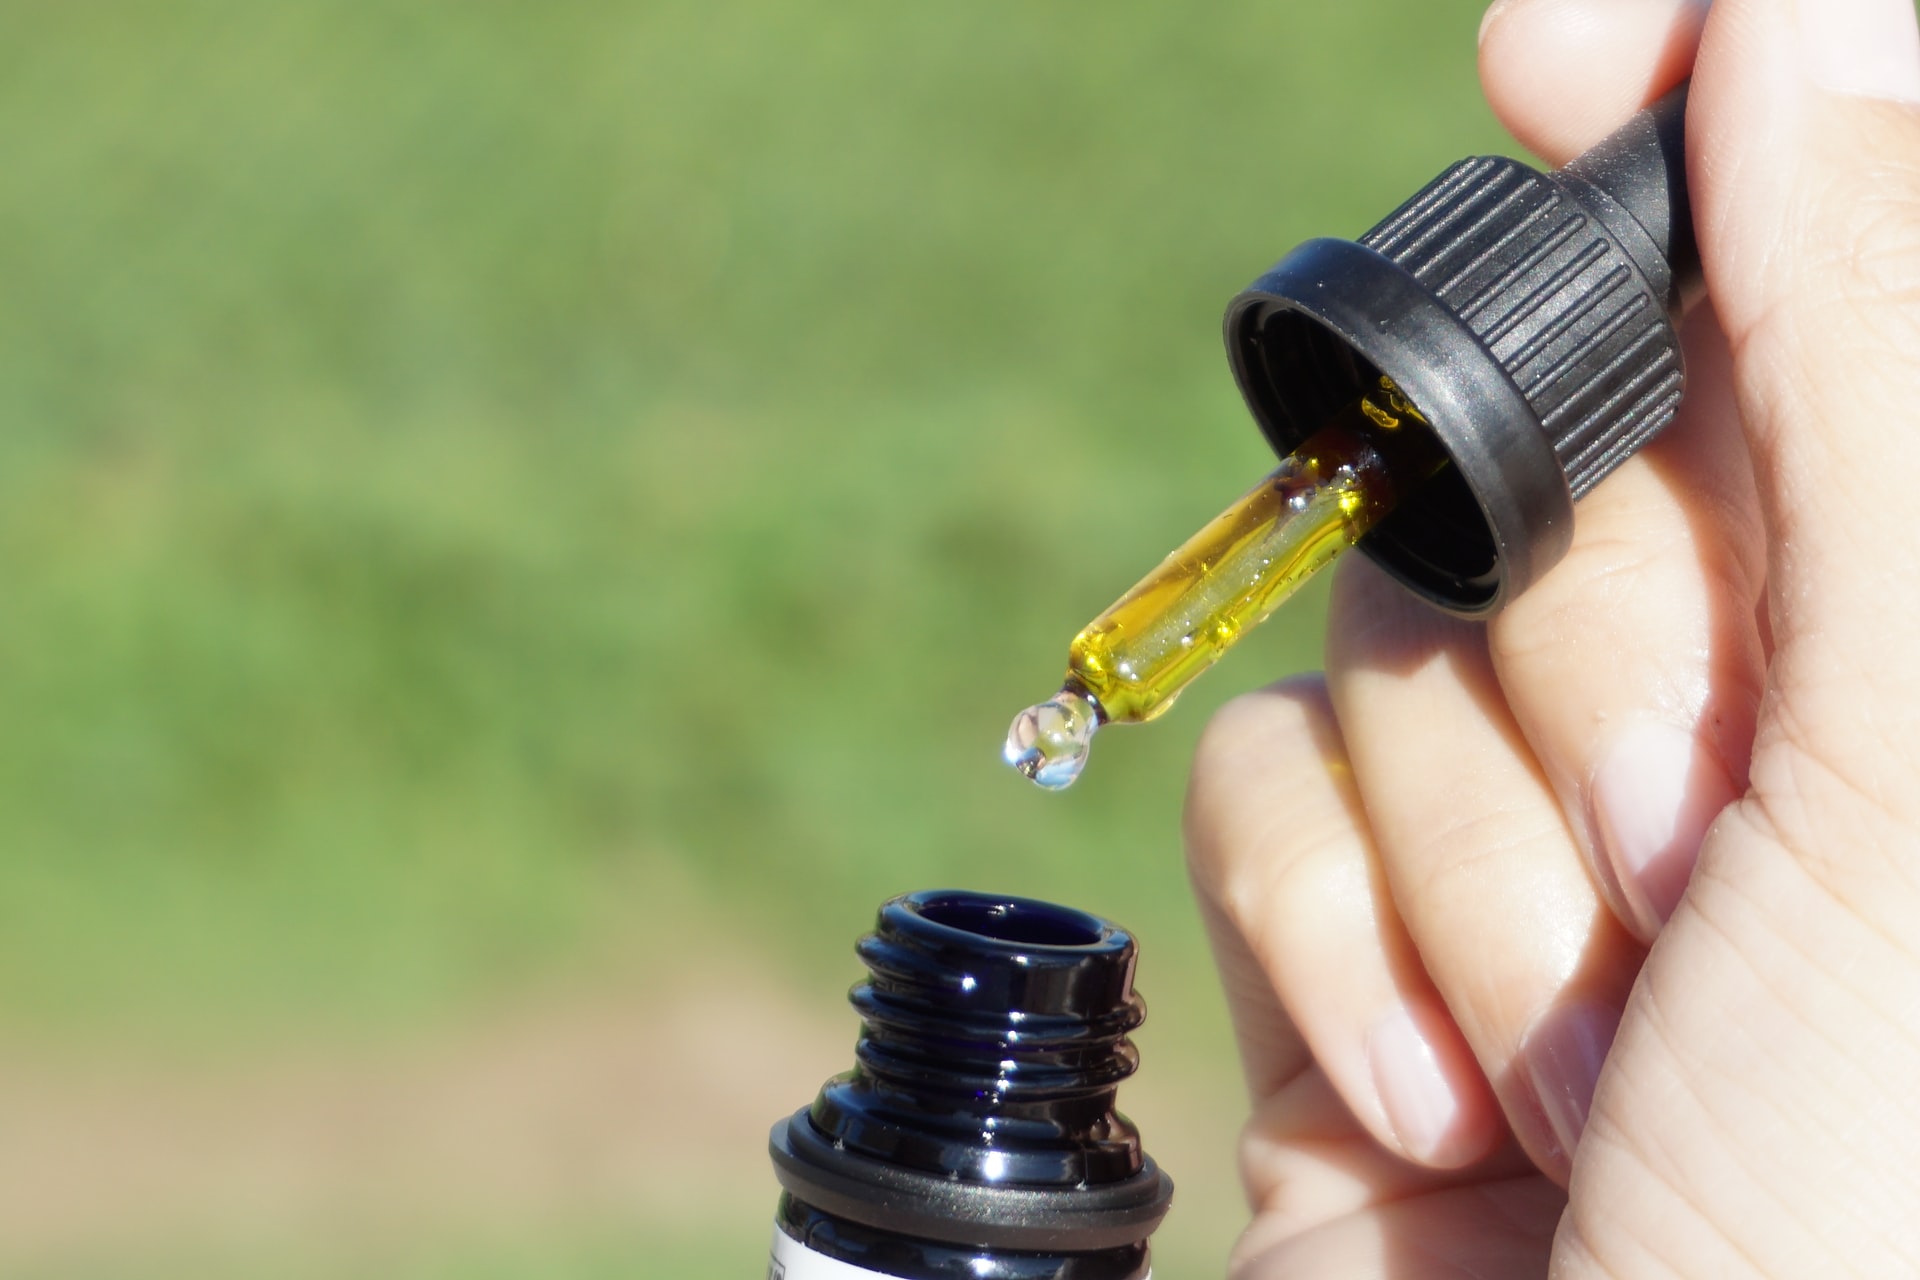 Travelling with CBD oil